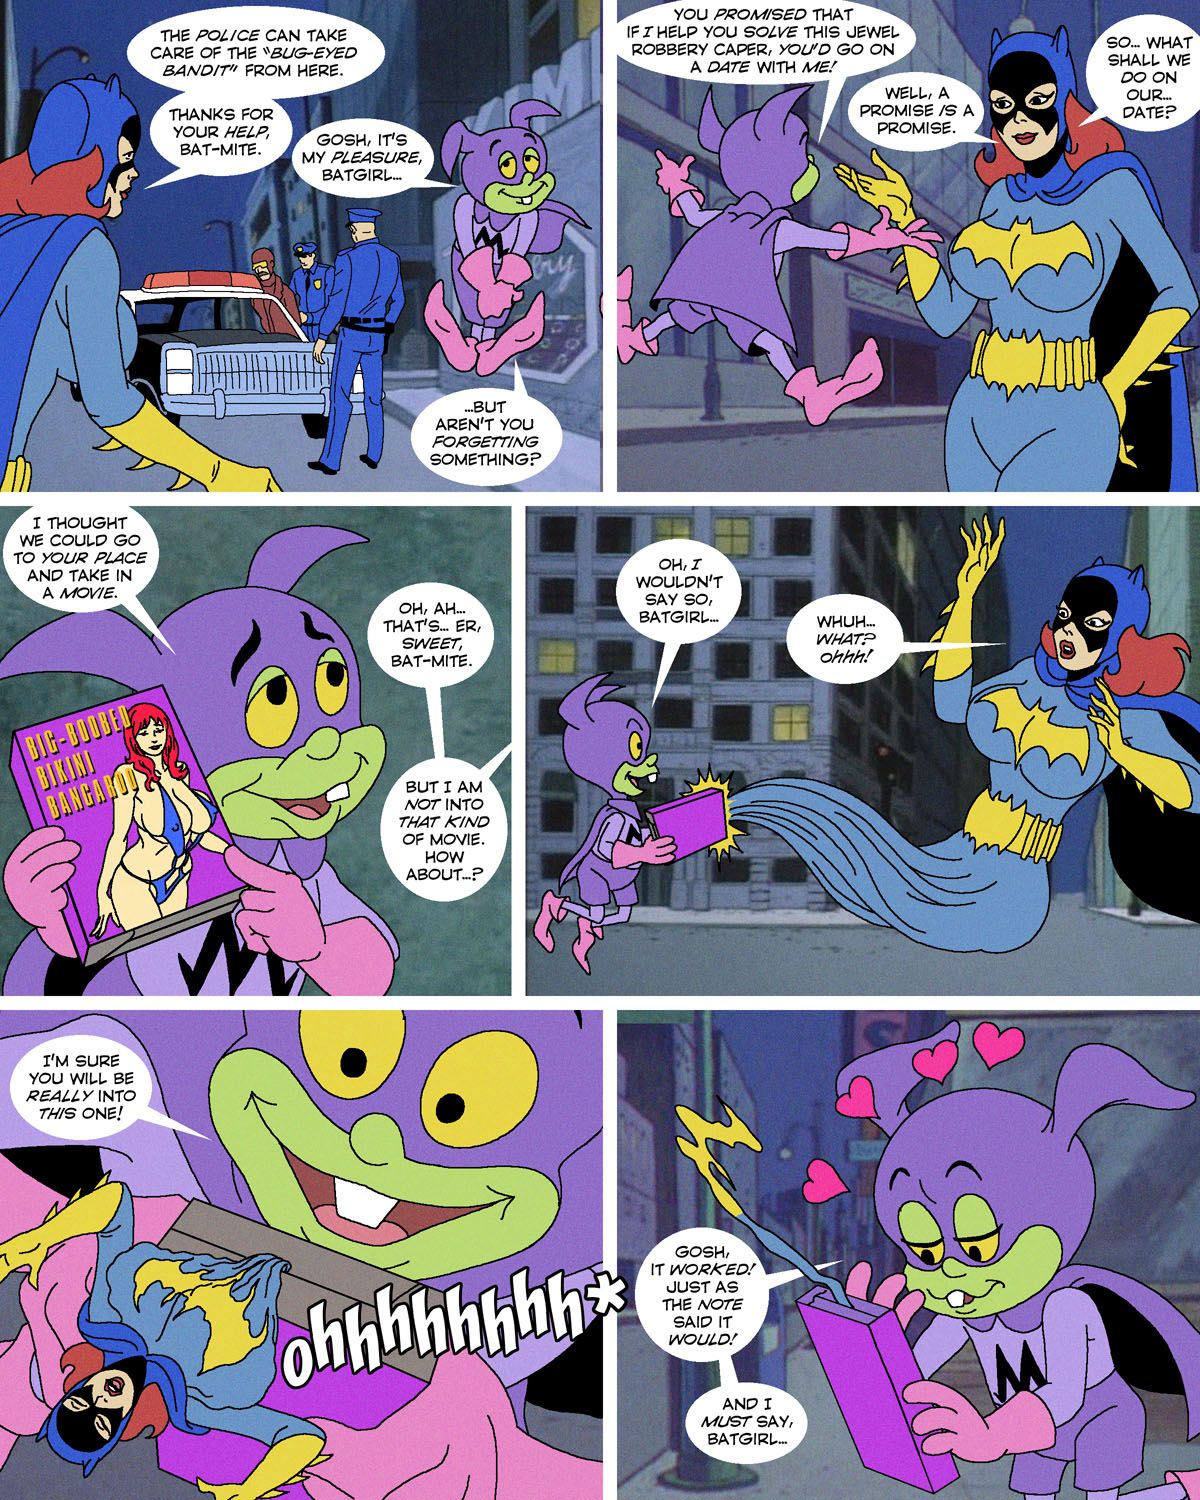 The New Adventures of Batgirl -- Video Dating (ongoing) 1